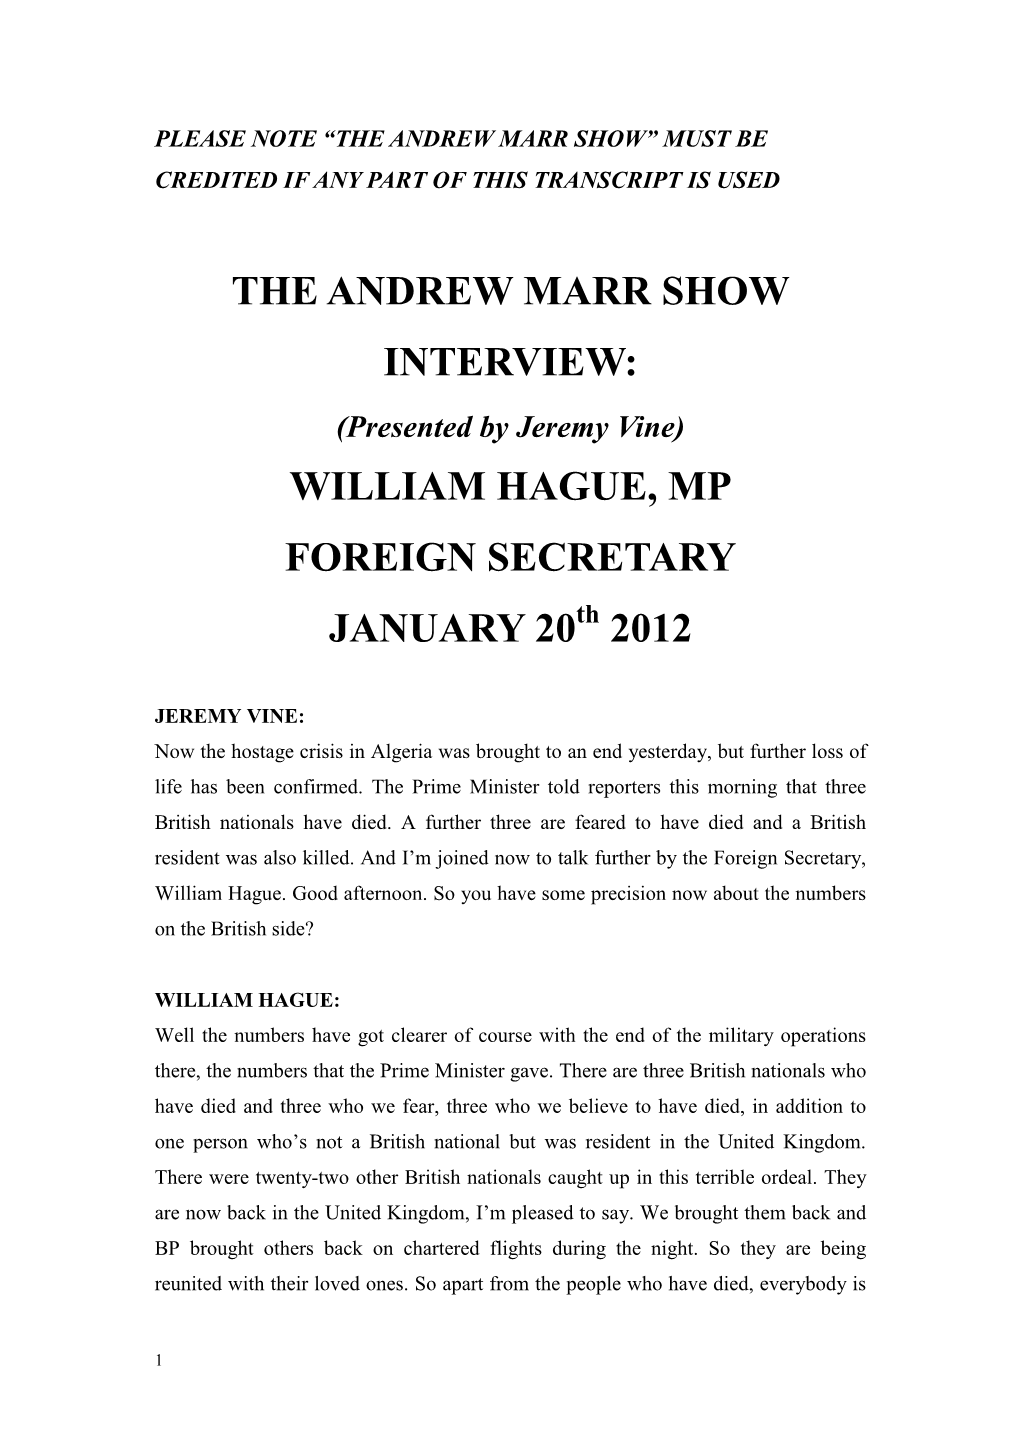 The Andrew Marr Show Interview: William Hague, Mp